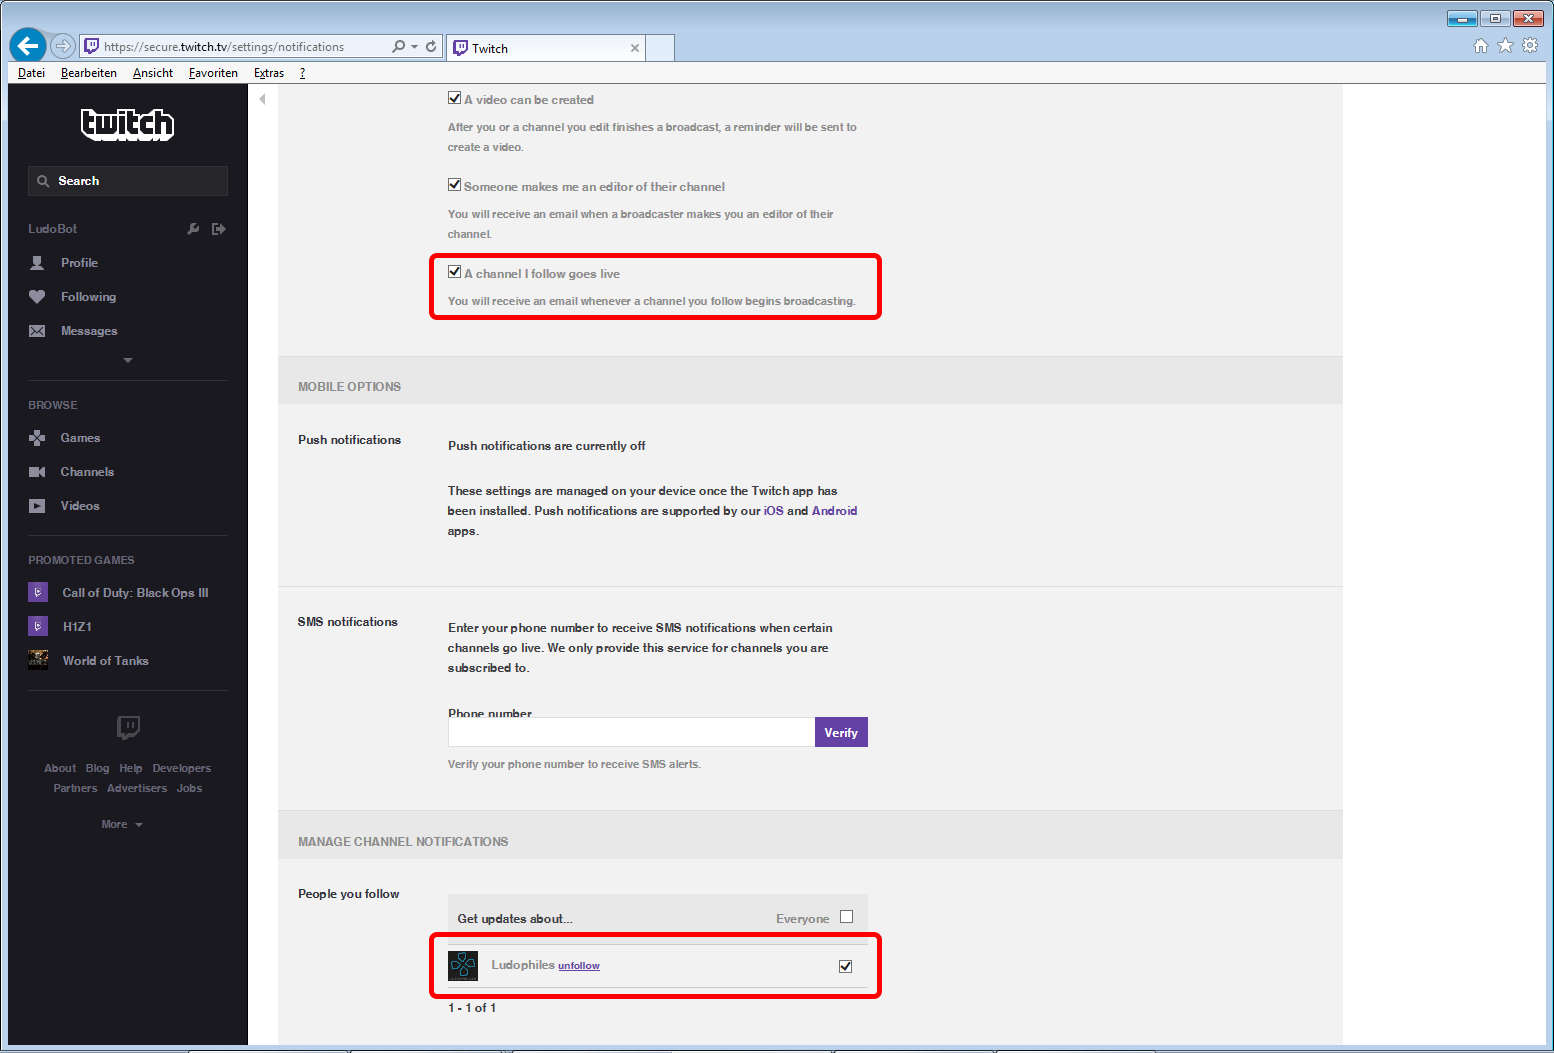 Enable-Twitch-email-notification-when-channel-goes-live-02.png